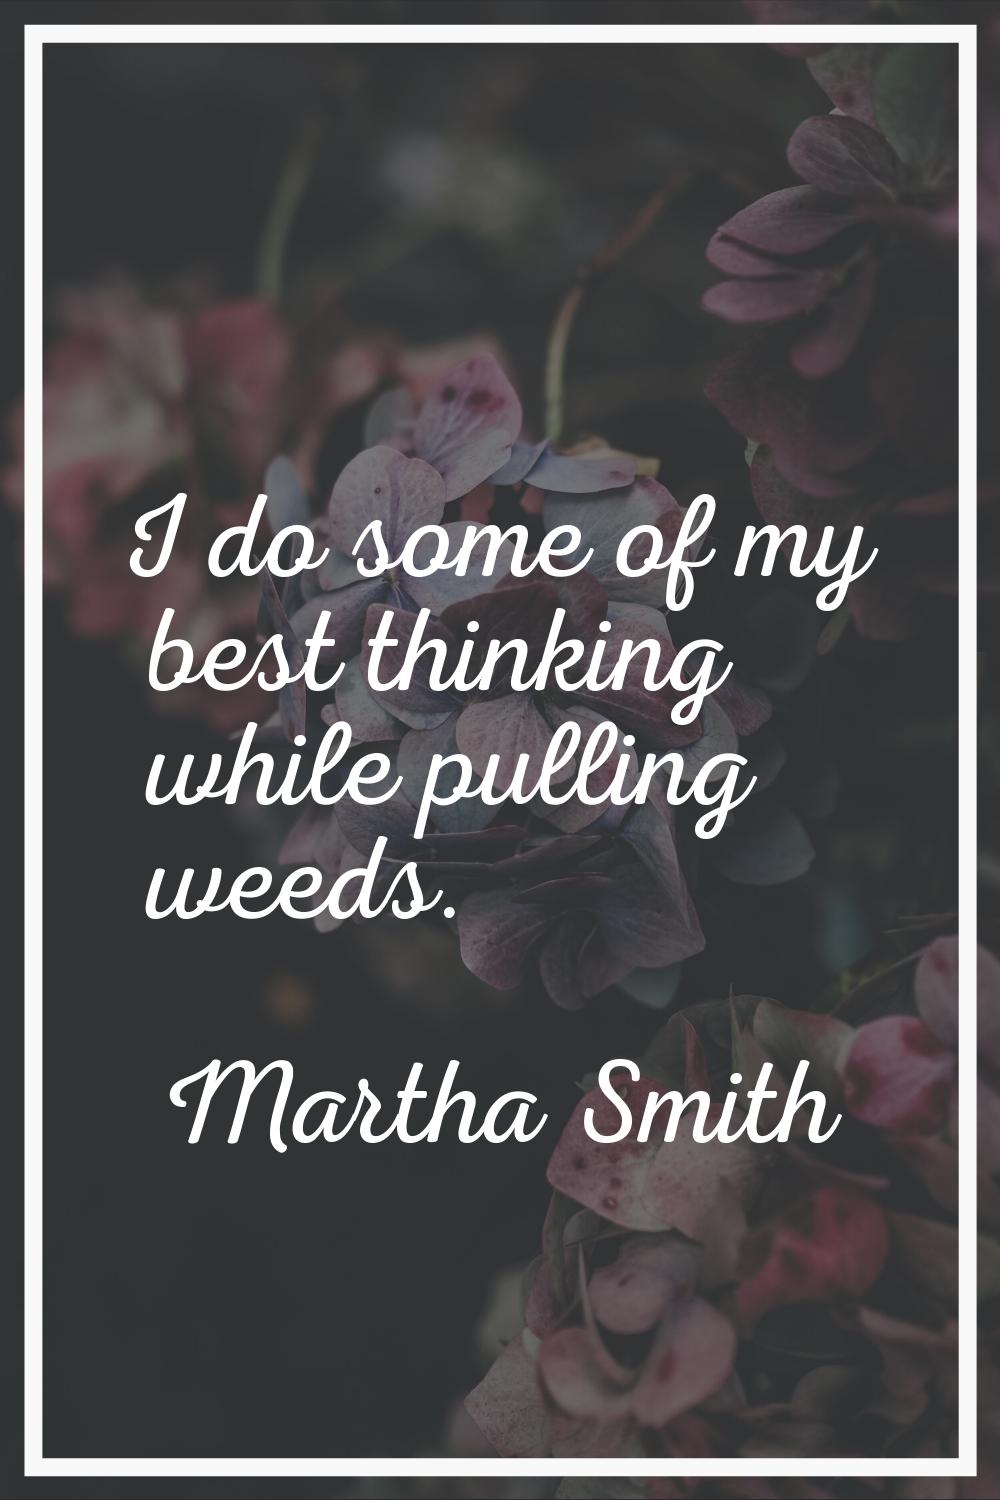 I do some of my best thinking while pulling weeds.